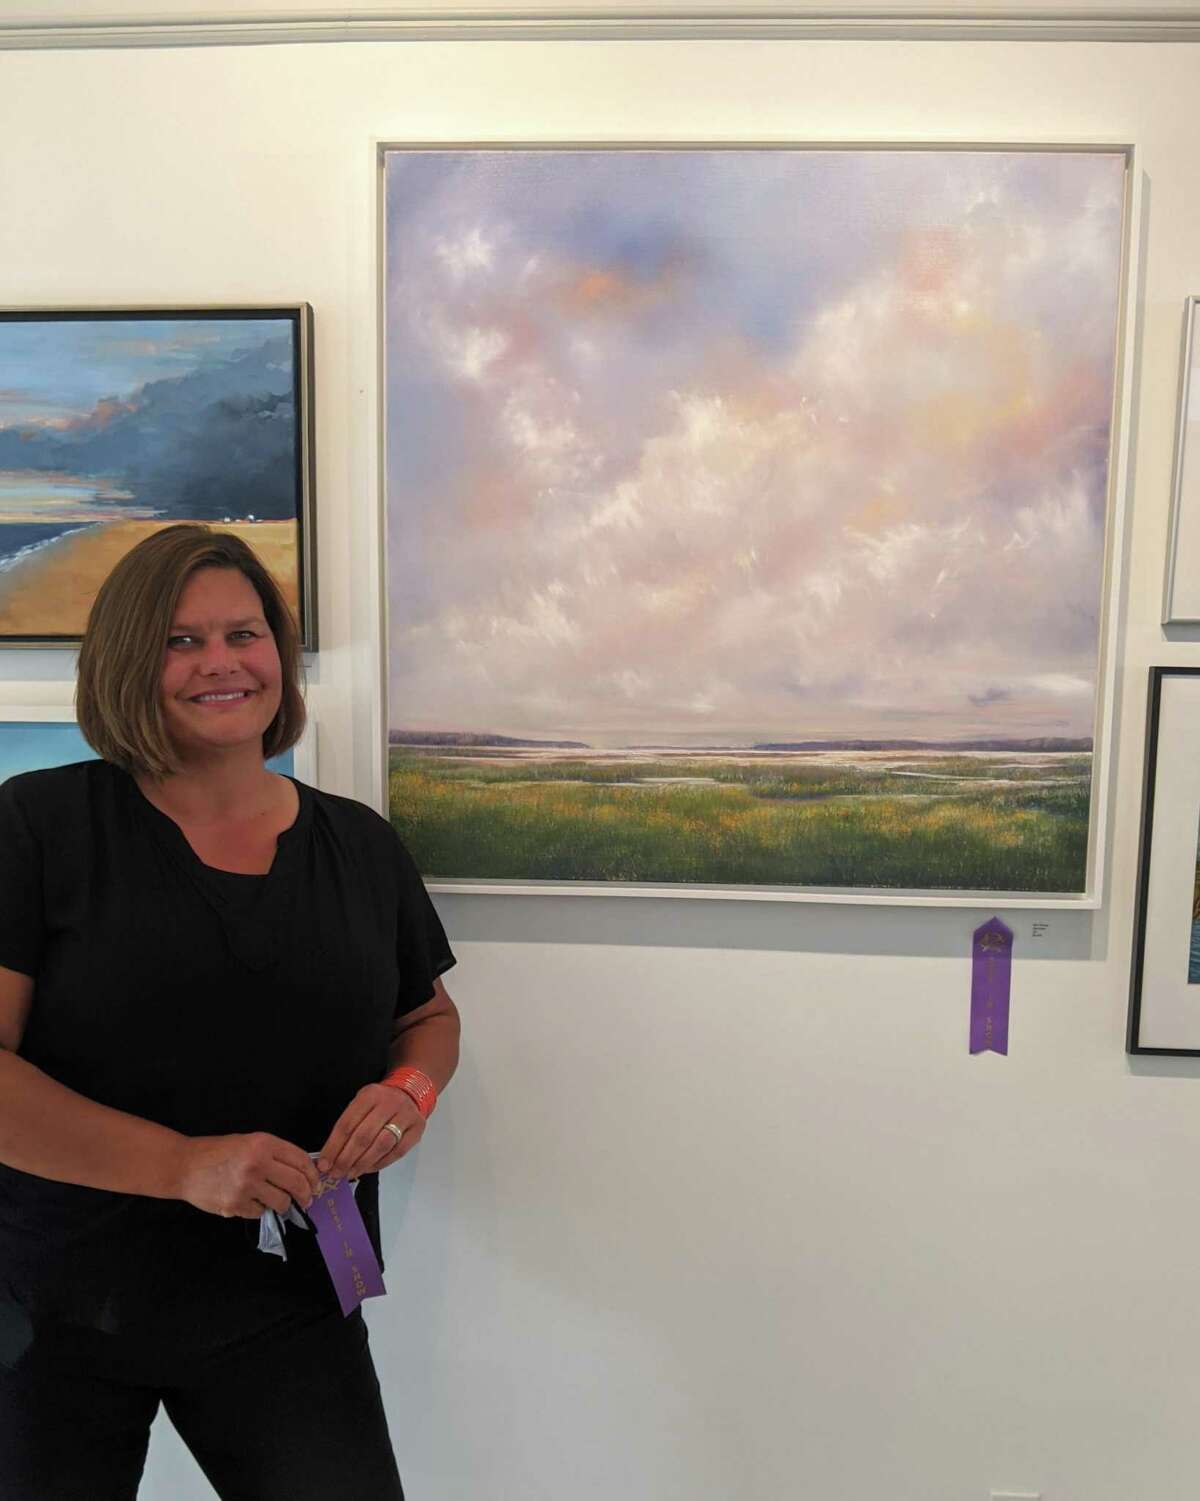 Rowayton Arts Center gallery in Norwalk is hosting the “Marine & Coastal Art” exhibition through Oct. 10. Pictured is Best in Show winner Kris Toohey, with her oil painting “Skyscape.”